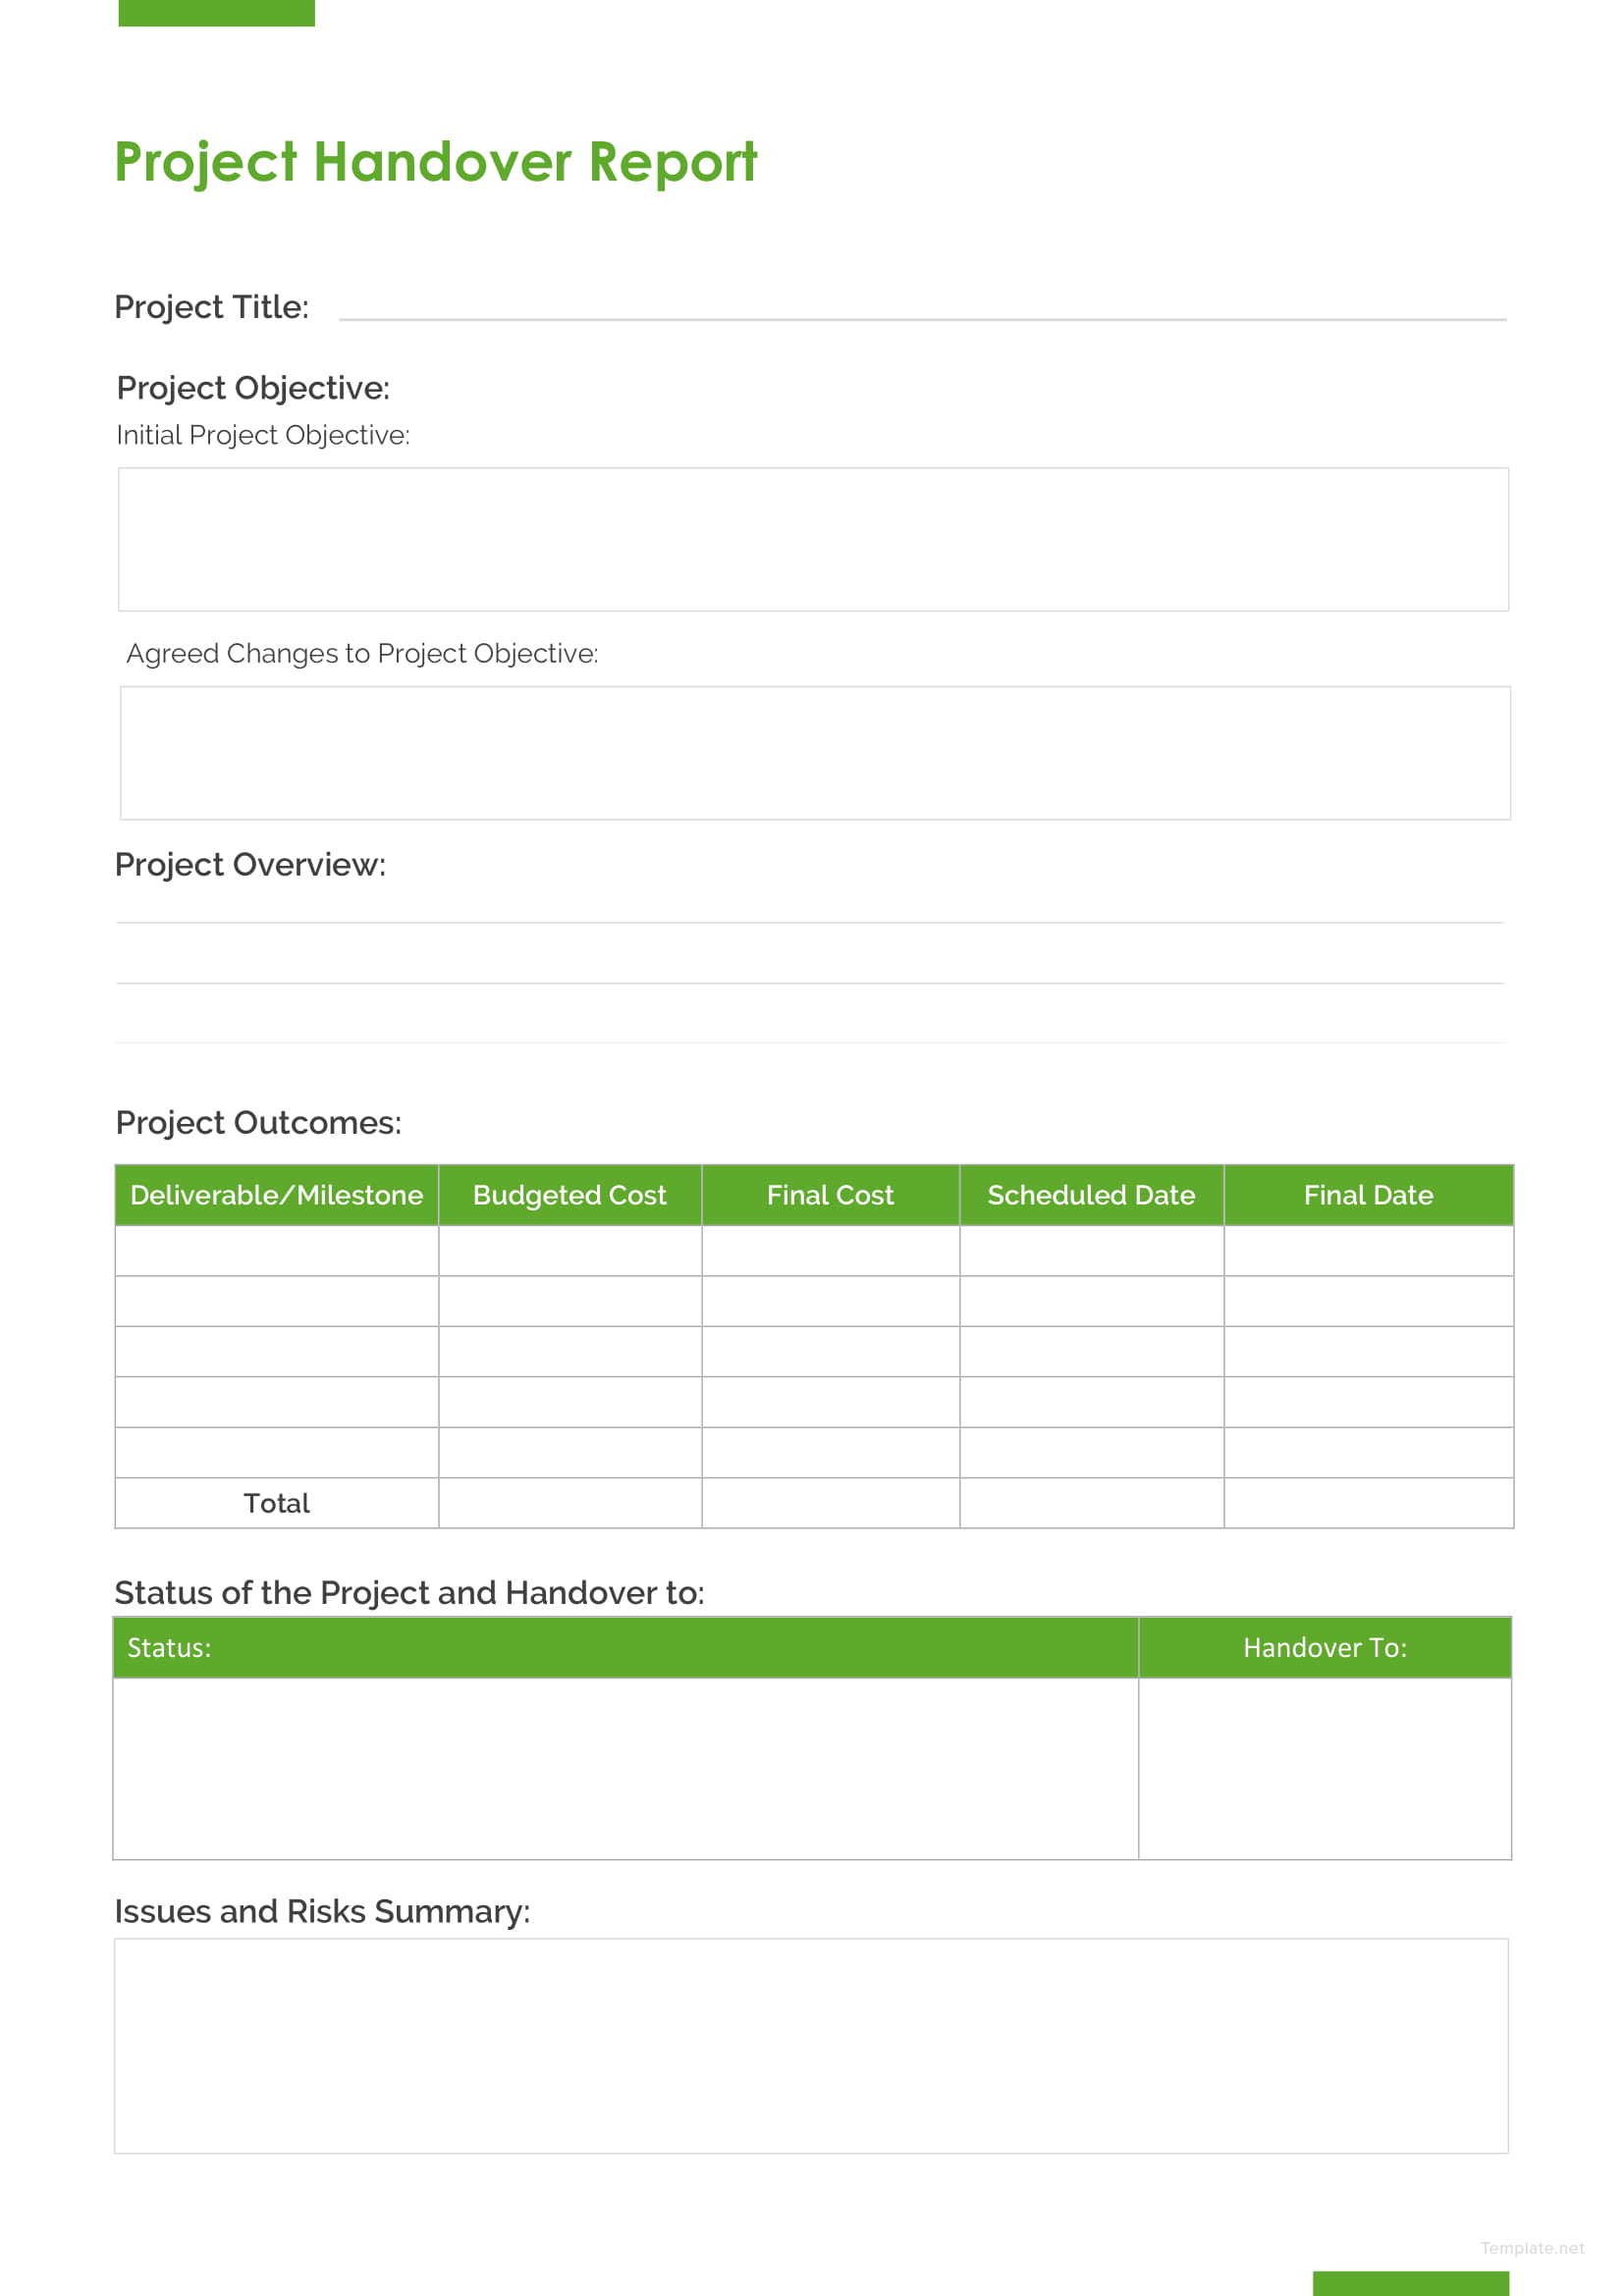 Project Handover Report Template in Microsoft Word